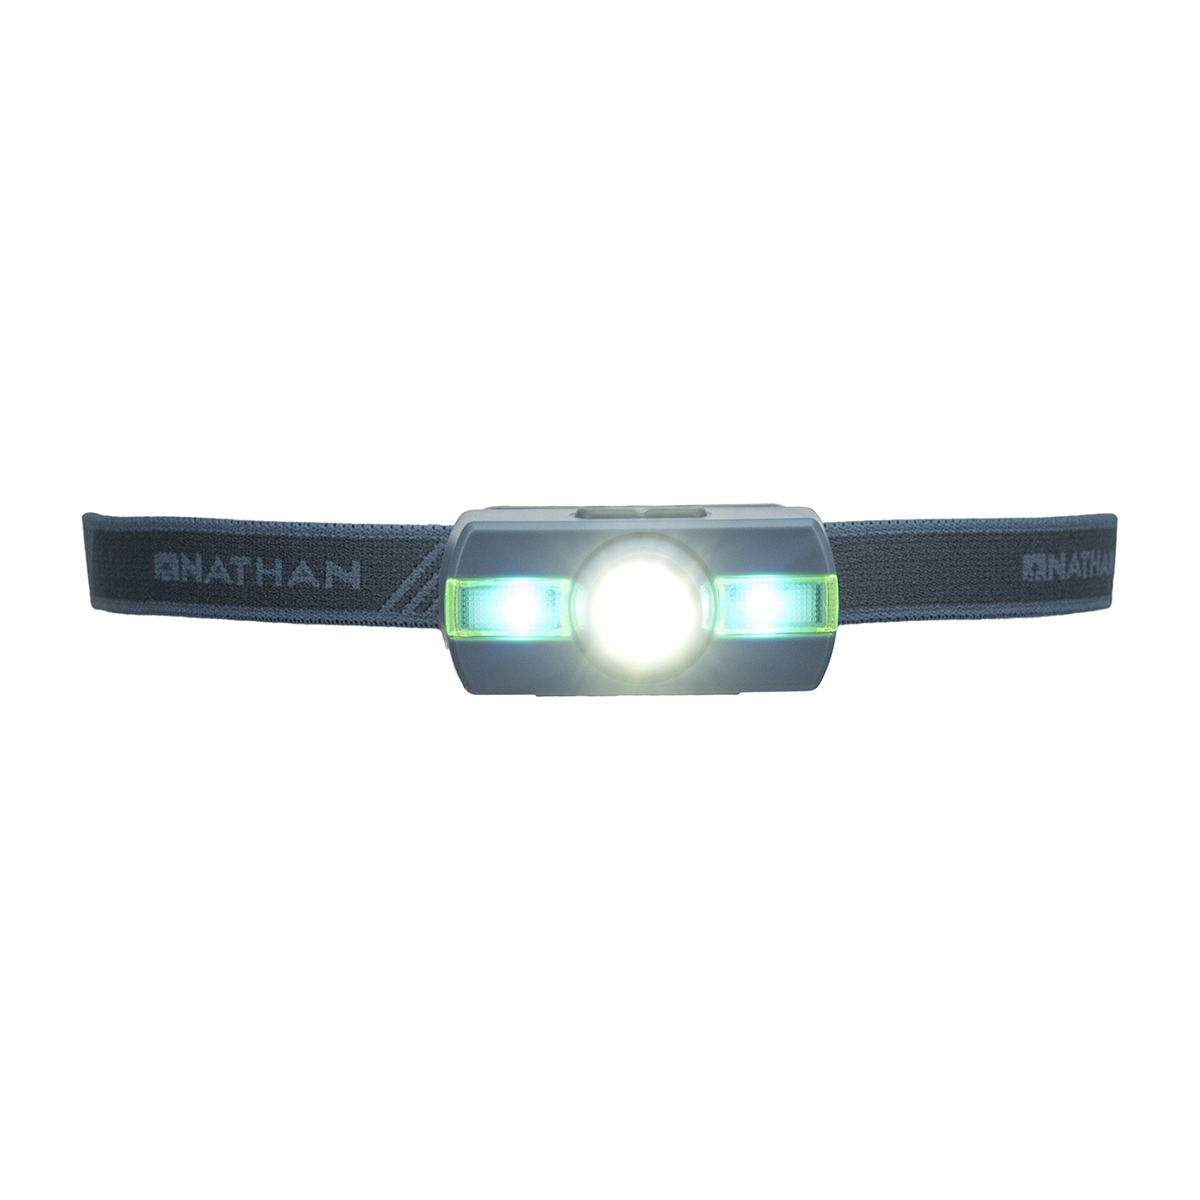 Nathan Neutron Fire Runner Headlamp, , large image number null